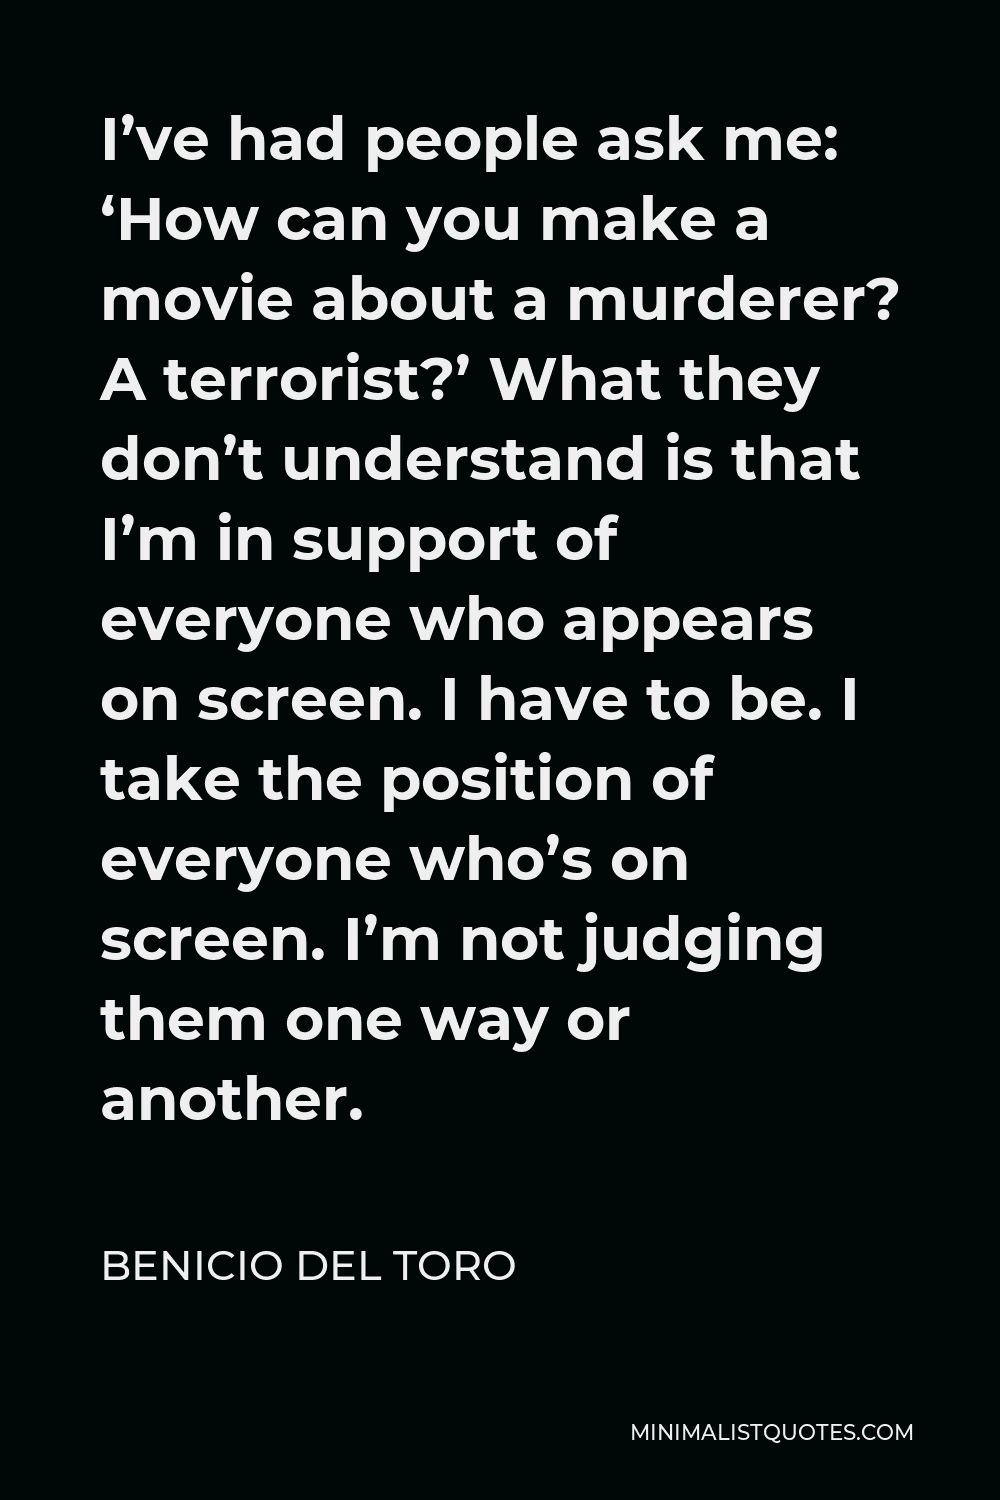 Benicio Del Toro Quote - I’ve had people ask me: ‘How can you make a movie about a murderer? A terrorist?’ What they don’t understand is that I’m in support of everyone who appears on screen. I have to be. I take the position of everyone who’s on screen. I’m not judging them one way or another.